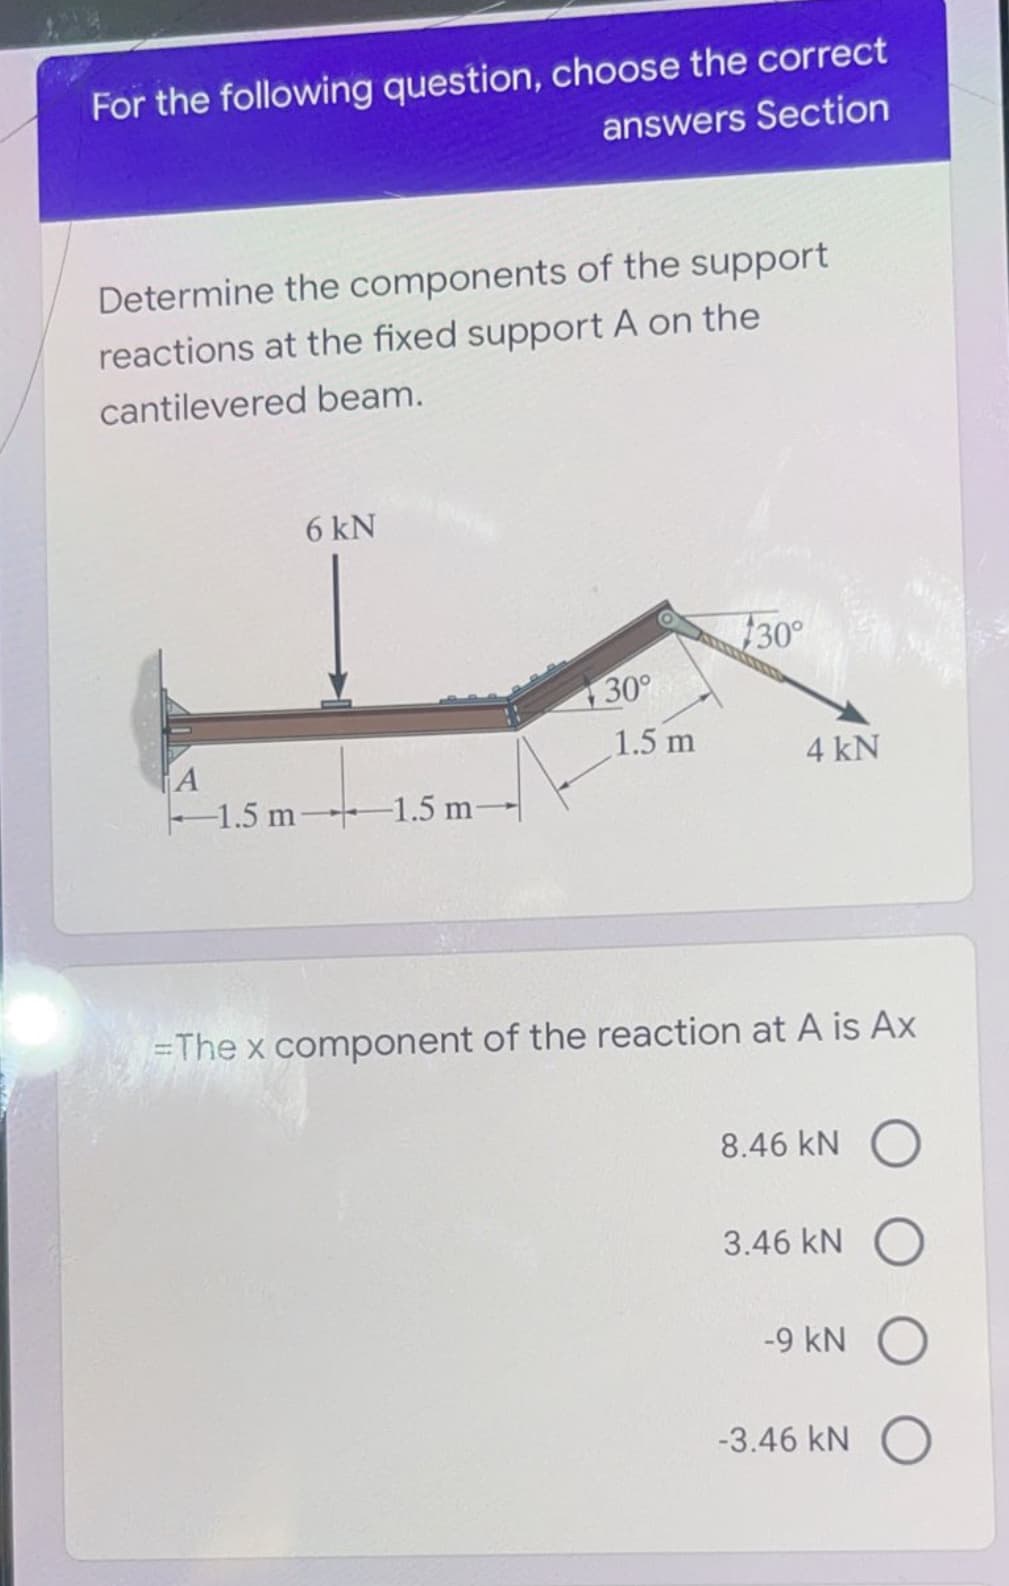 For the following question, choose the correct
answers Section
Determine the components of the support
reactions at the fixed support A on the
cantilevered beam.
6 kN
30°
30°
1.5 m
A
1.5 m 1.5 m-
4 kN
=The x component of the reaction at A is Ax
8.46 kN
3.46 kN
-9 kN
-3.46 kN O
